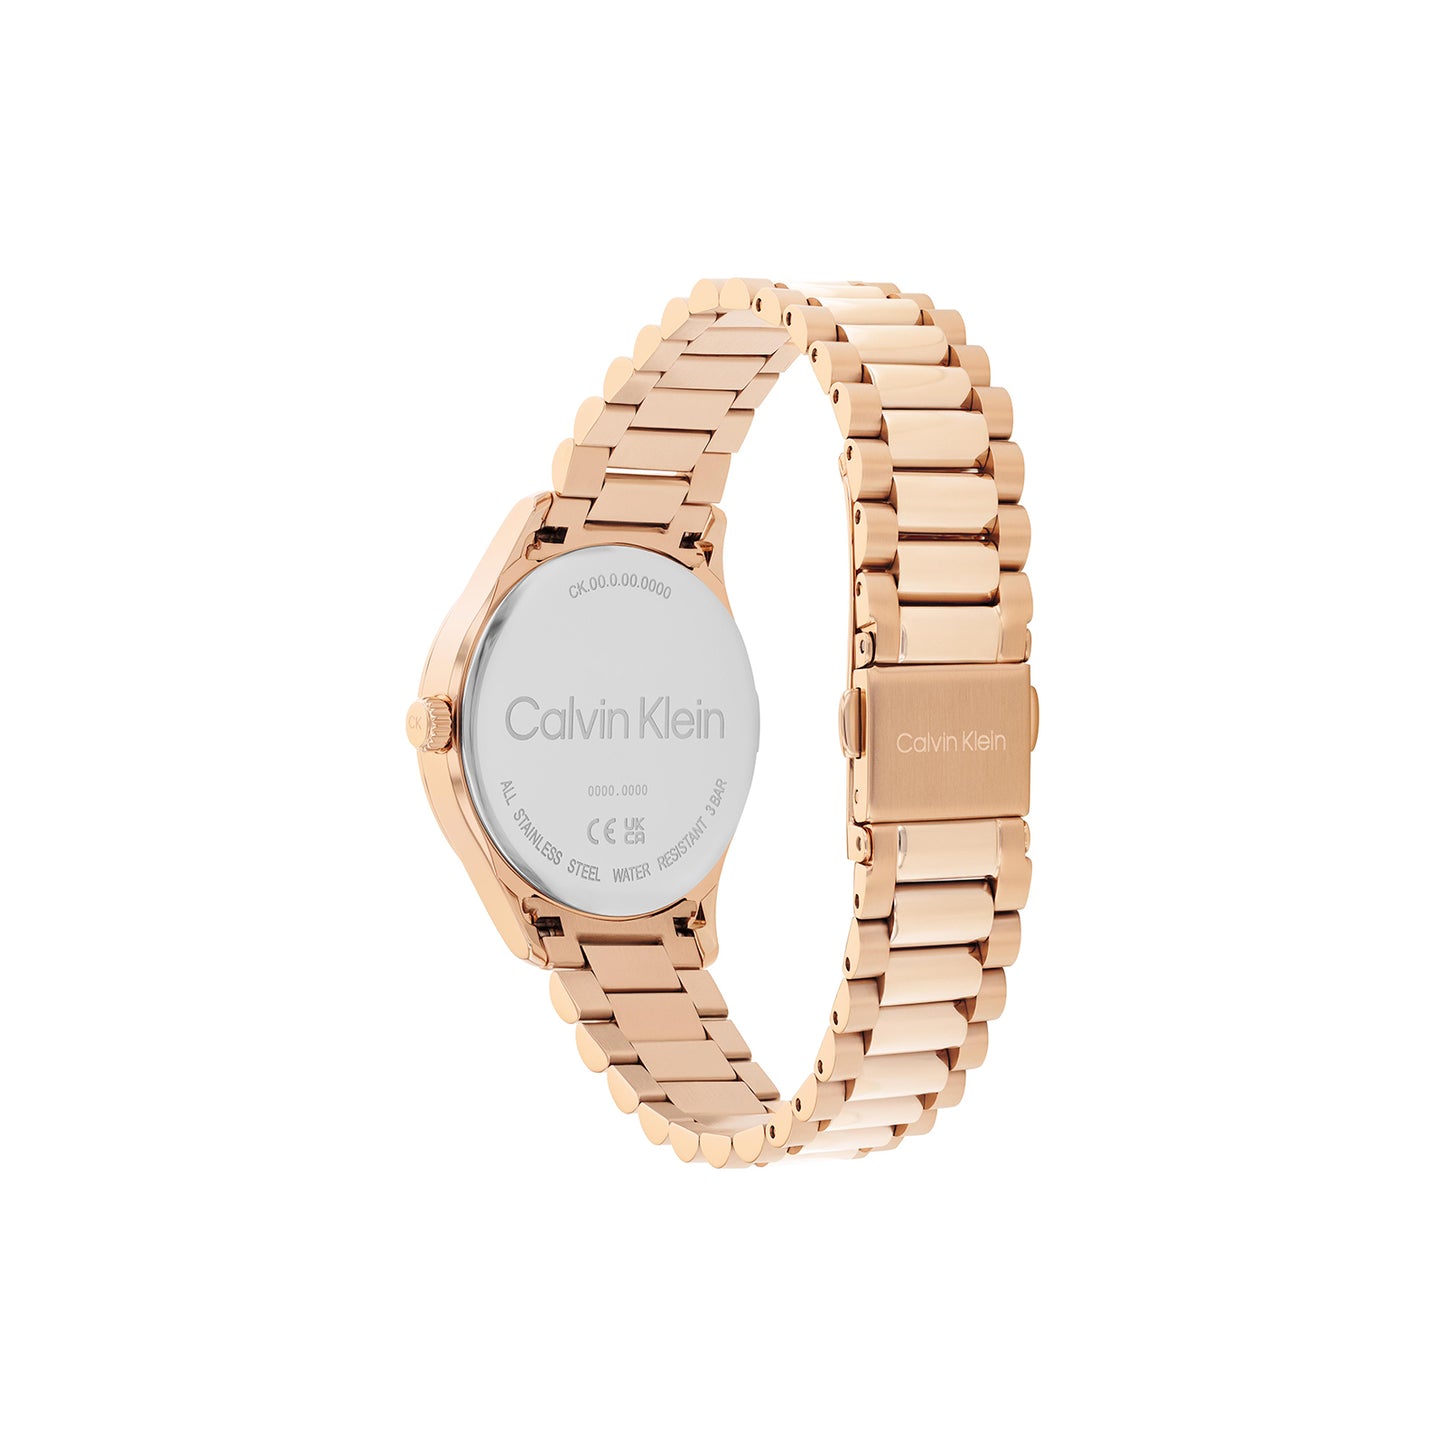 Calvin Klein 25200347 Unisex Ionic Rose Gold Plated Steel Watch